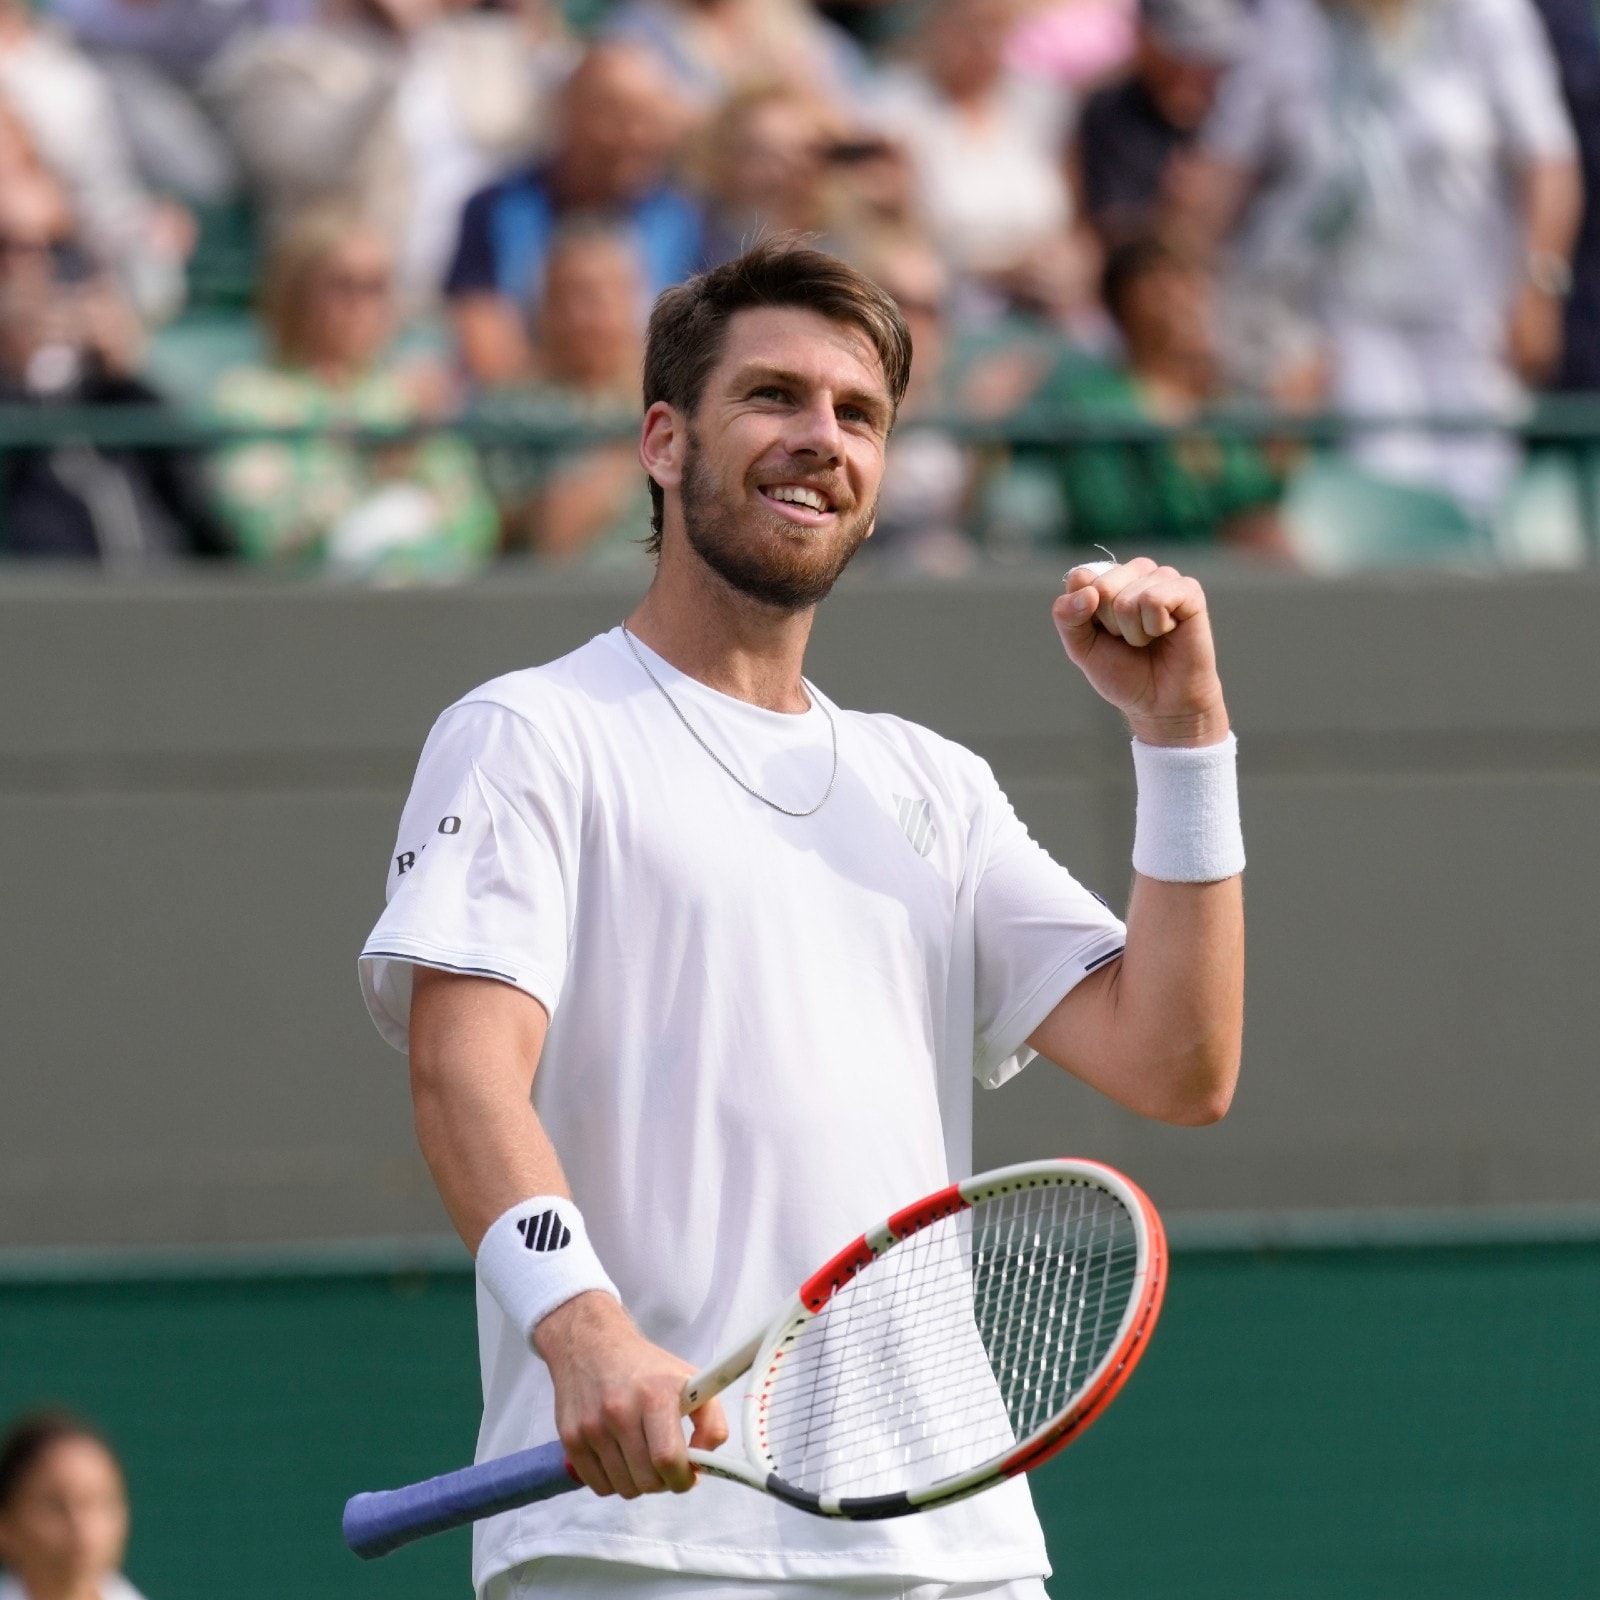 US Open 2022 Cameron Norrie Defeats Danish Holger to Move Into the Fourth Round